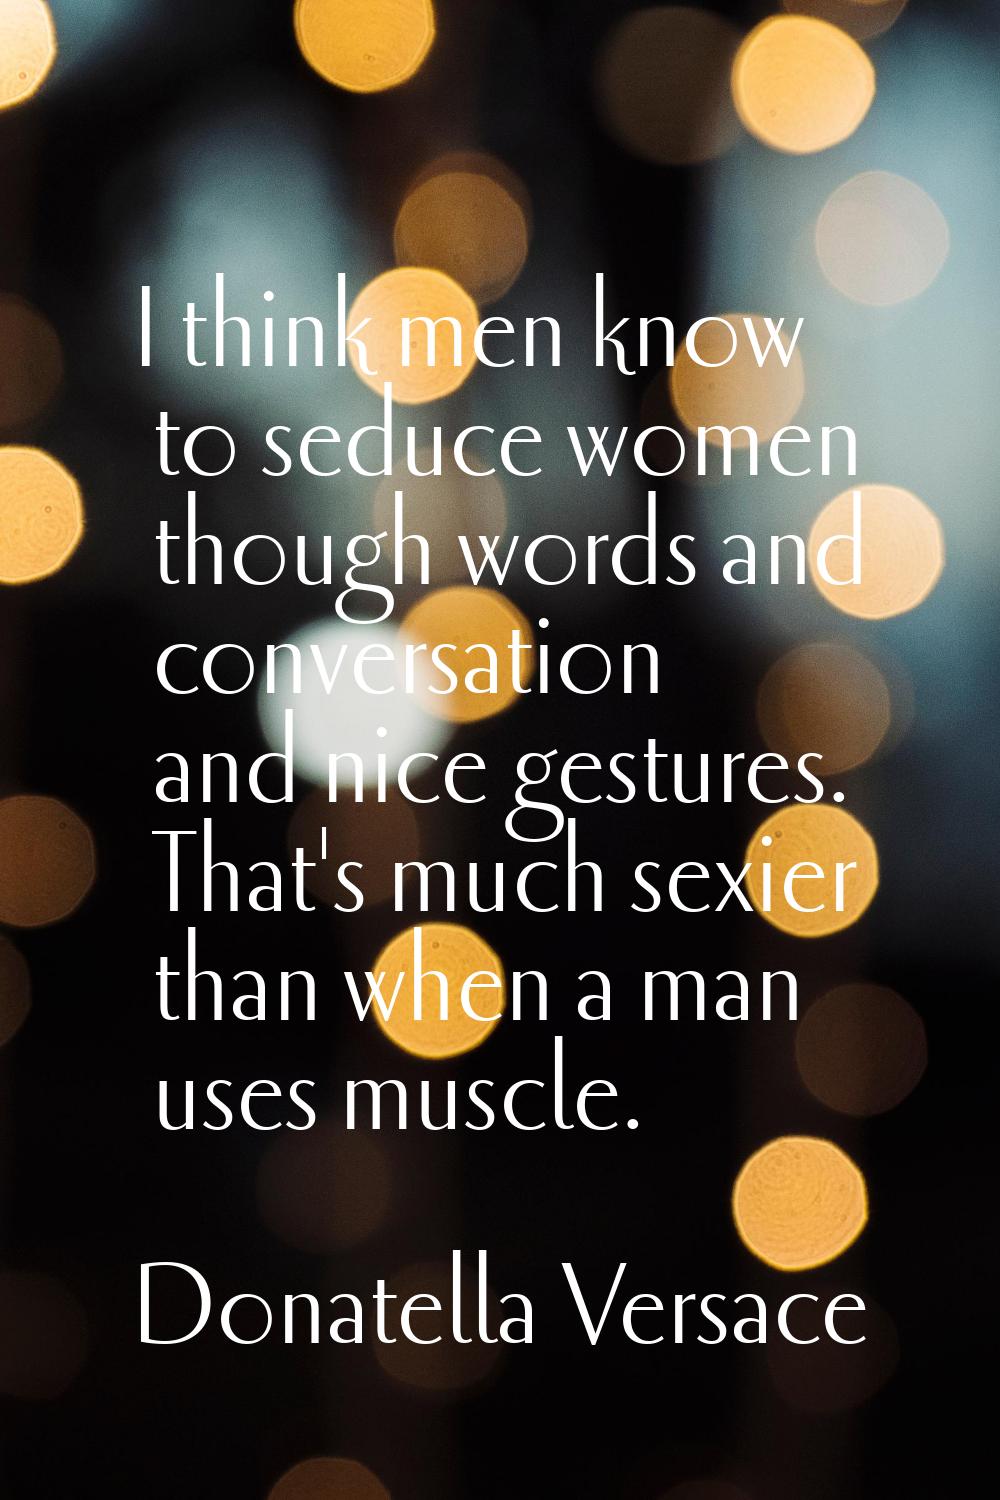 I think men know to seduce women though words and conversation and nice gestures. That's much sexie